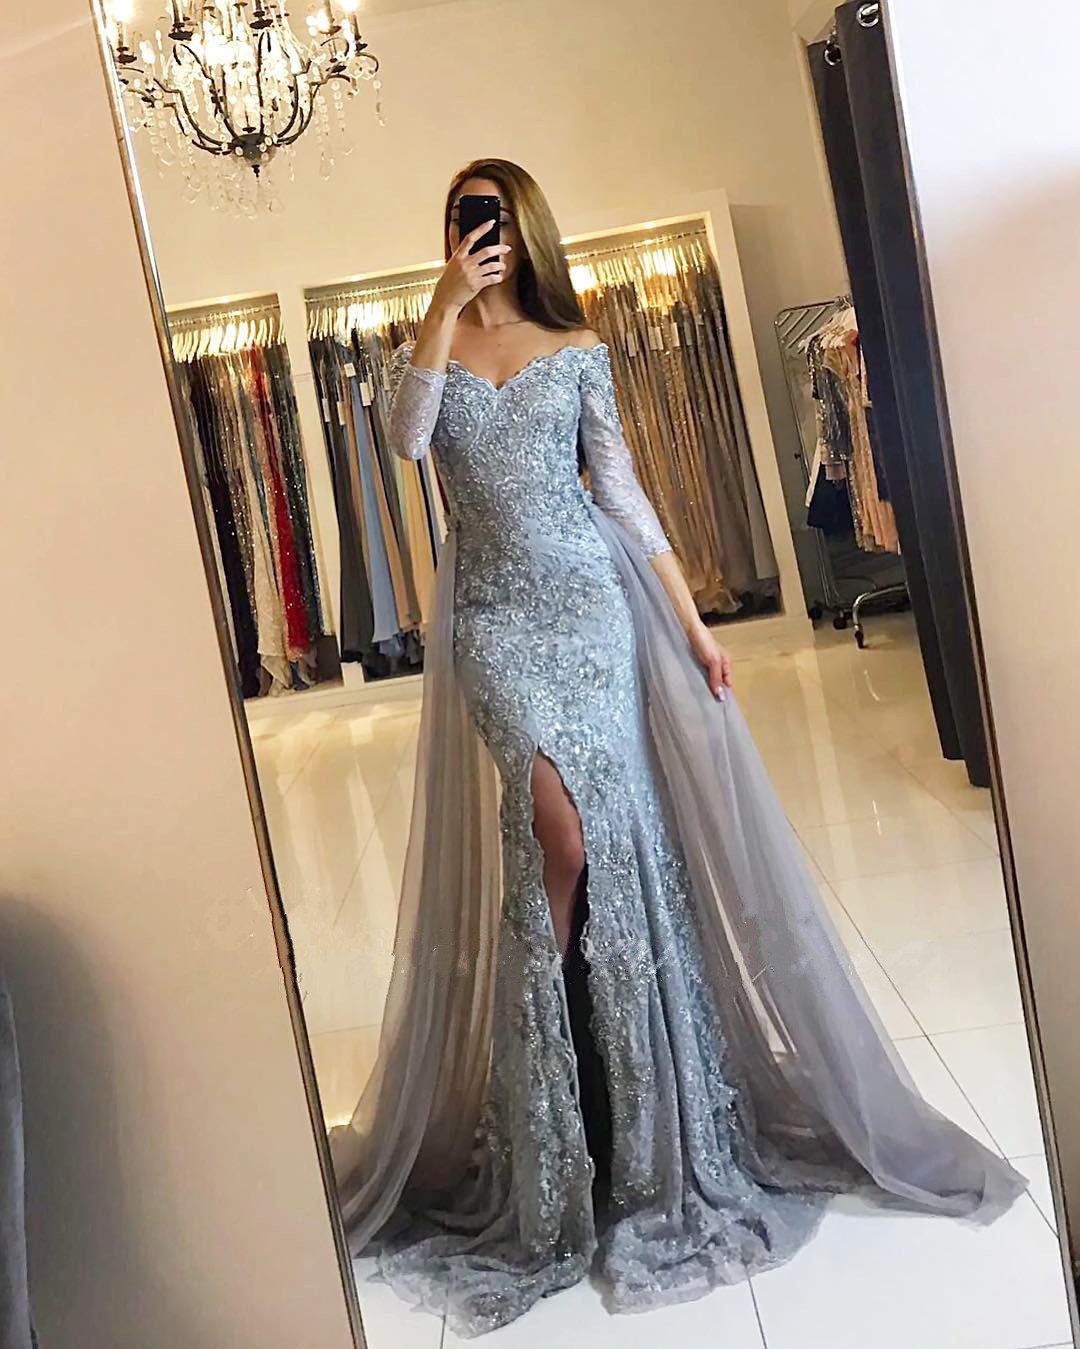 3/4 -Sleeves-Lace-Mermaid-Prom-Dresses-2019-Modest-Evening-Gowns